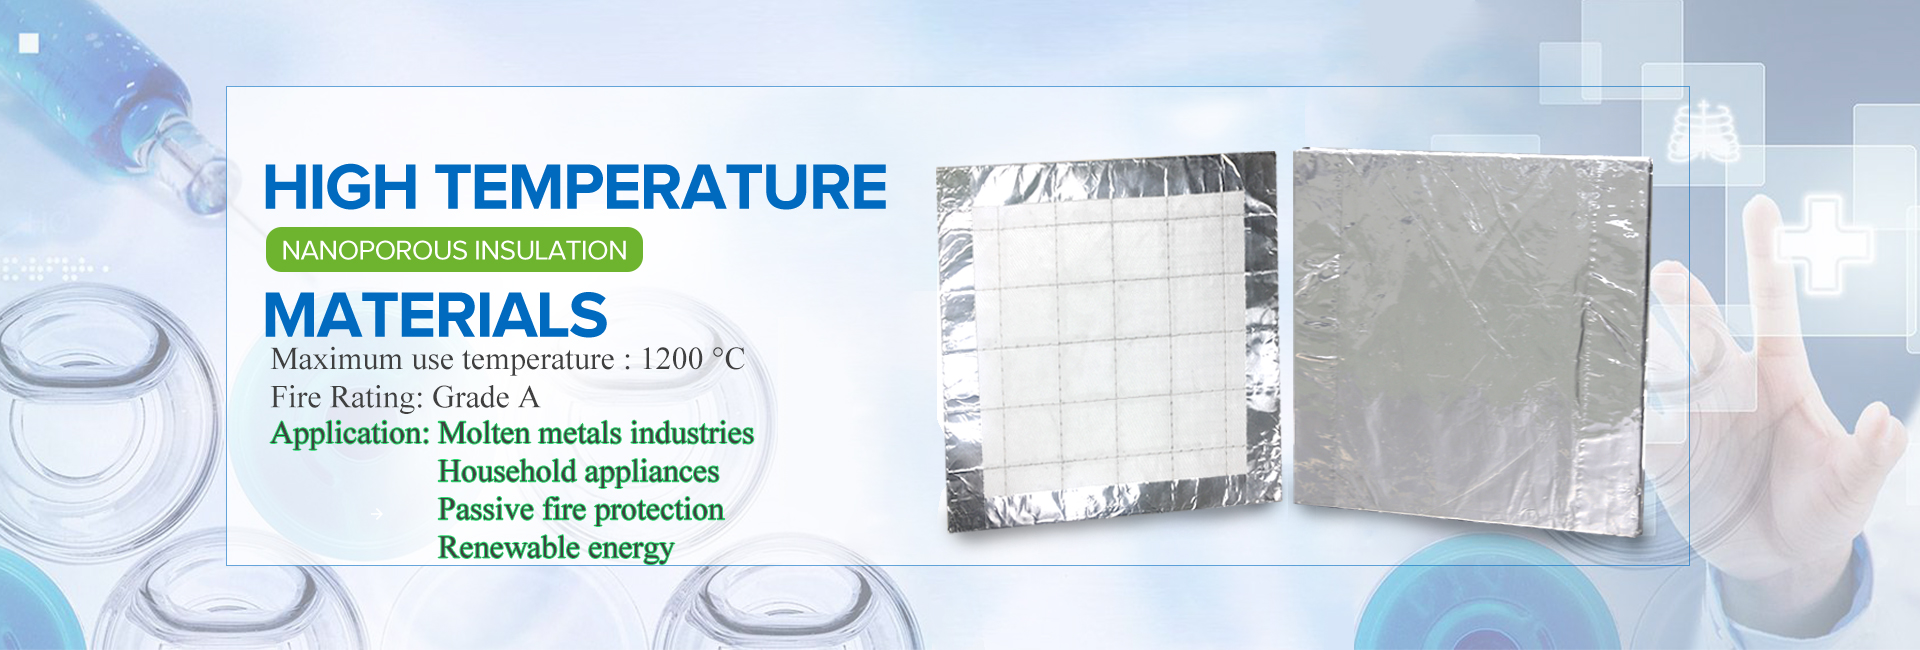 https://www.zerothermovip.com/high-temperature-nano-microporous-slotted-formatus-insulation-panels-product/